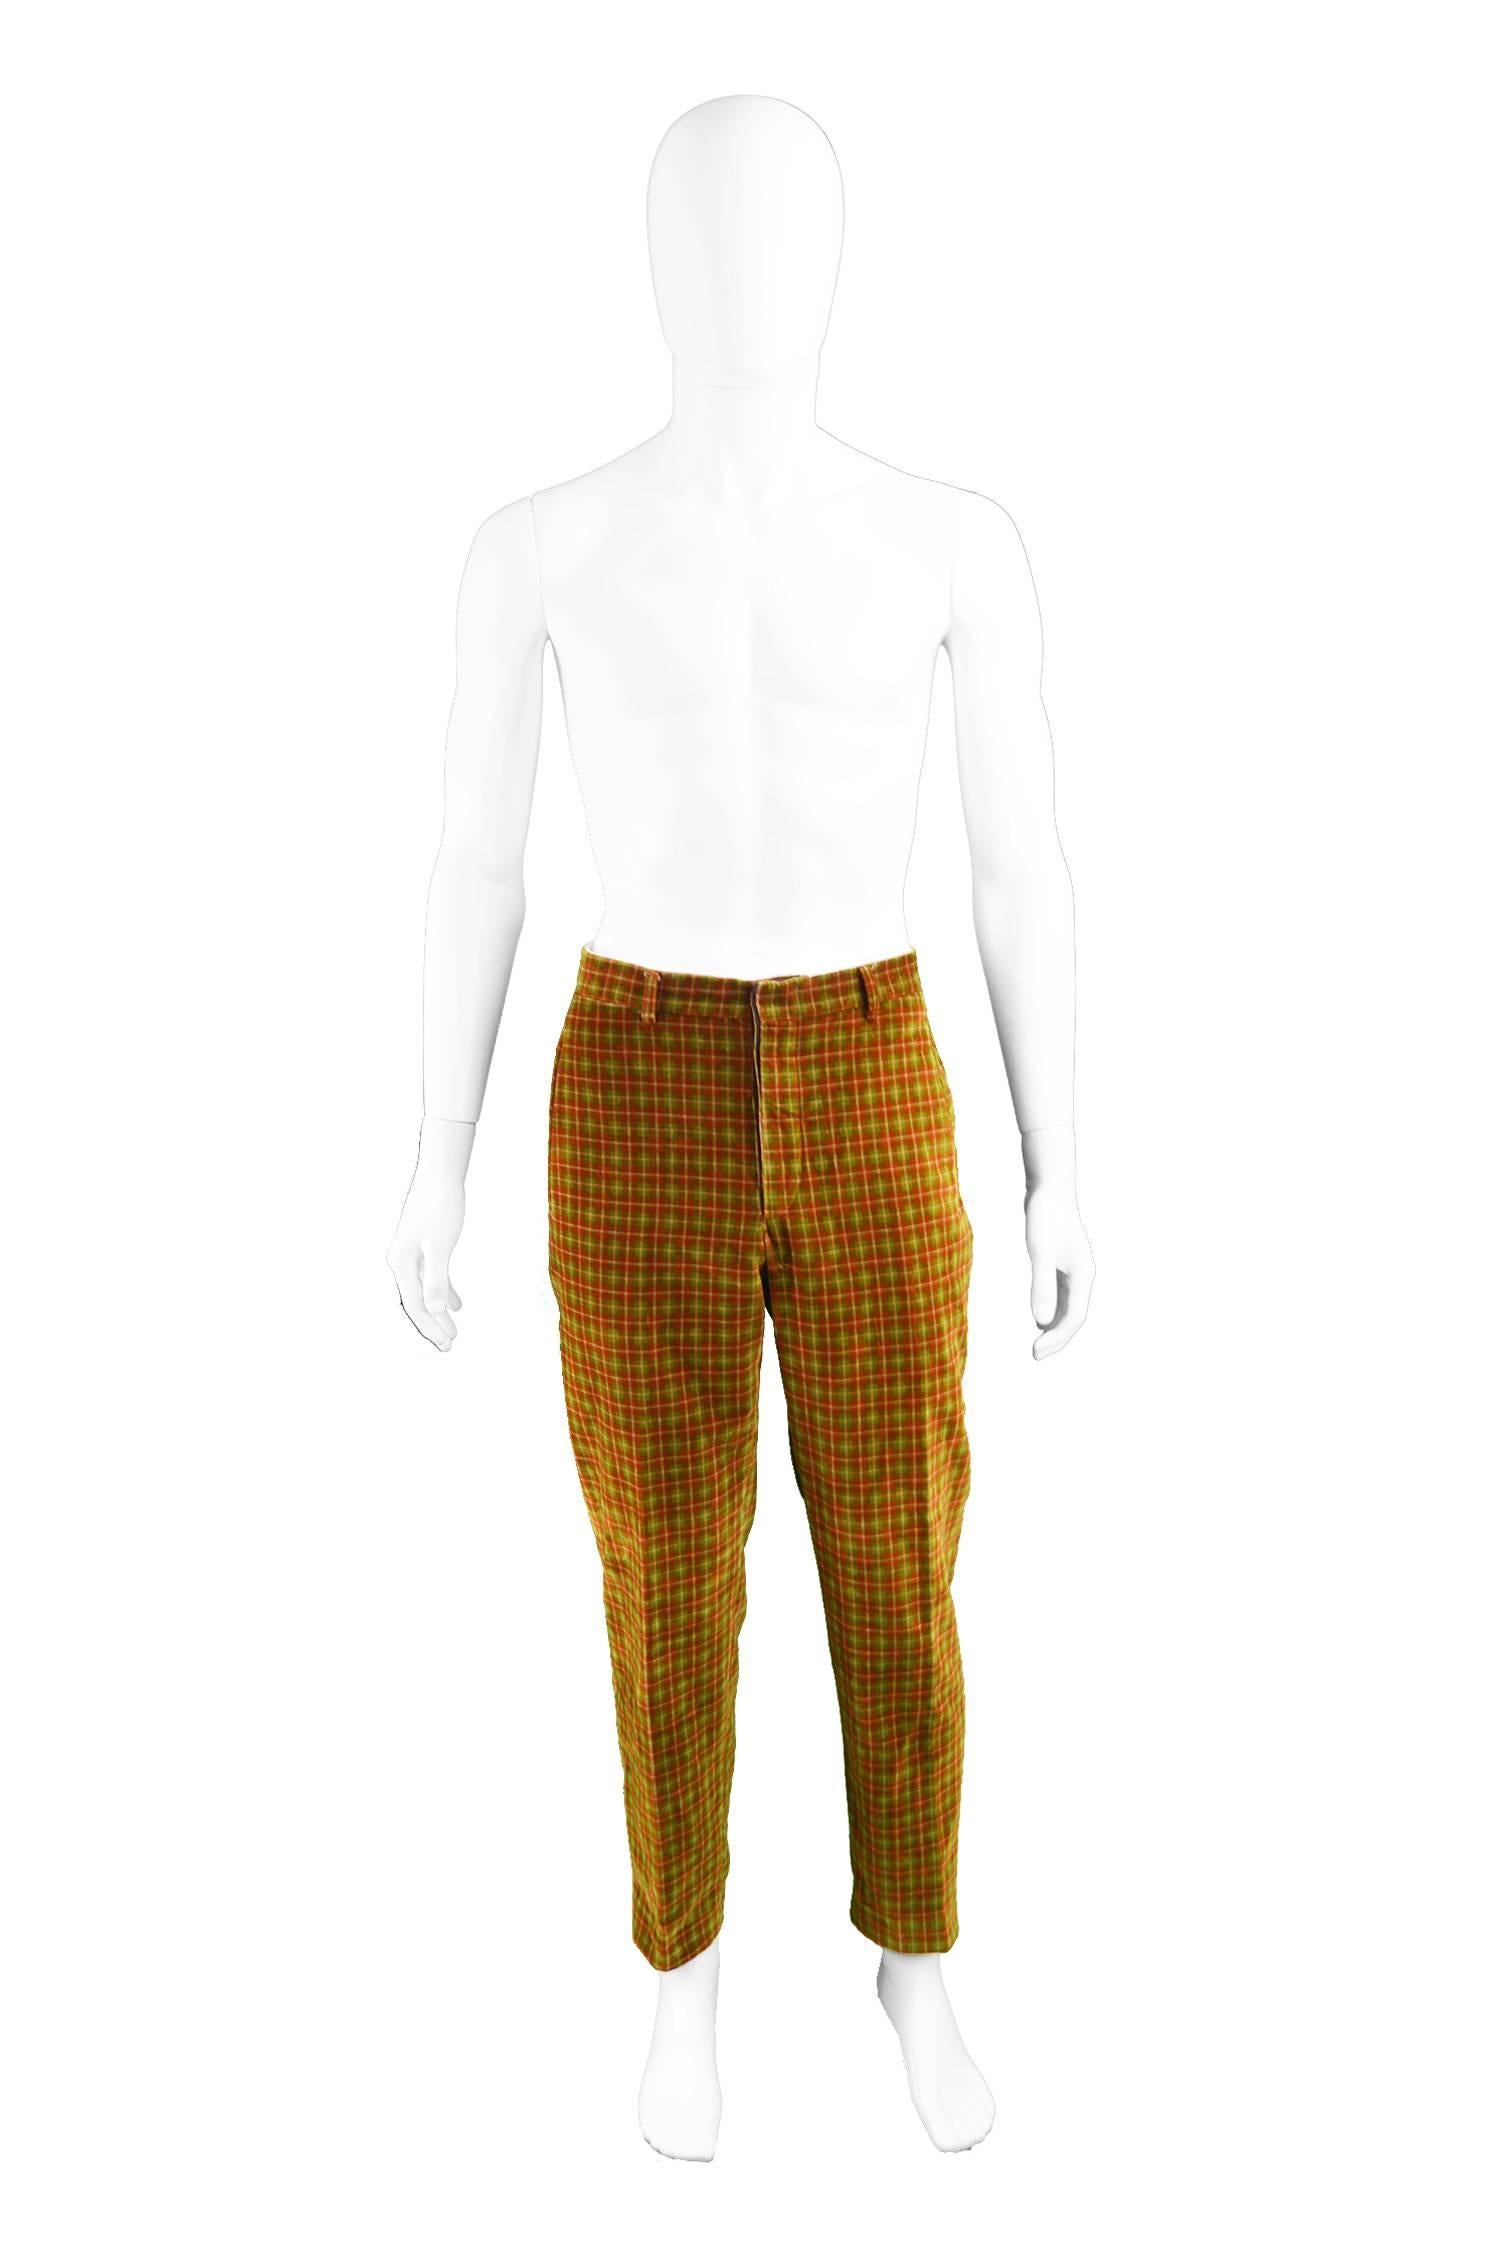 Romeo Gigli Men's Vintage Velvet Plaid Red & Green Straight Leg Pants, 1990s

Size: Marked 50 which is roughly a men's Medium. Please check measurements. 
Waist - 34” / 86cm (allow a couple of inches room for movement)
Hips - 42” / 106cm
Rise -